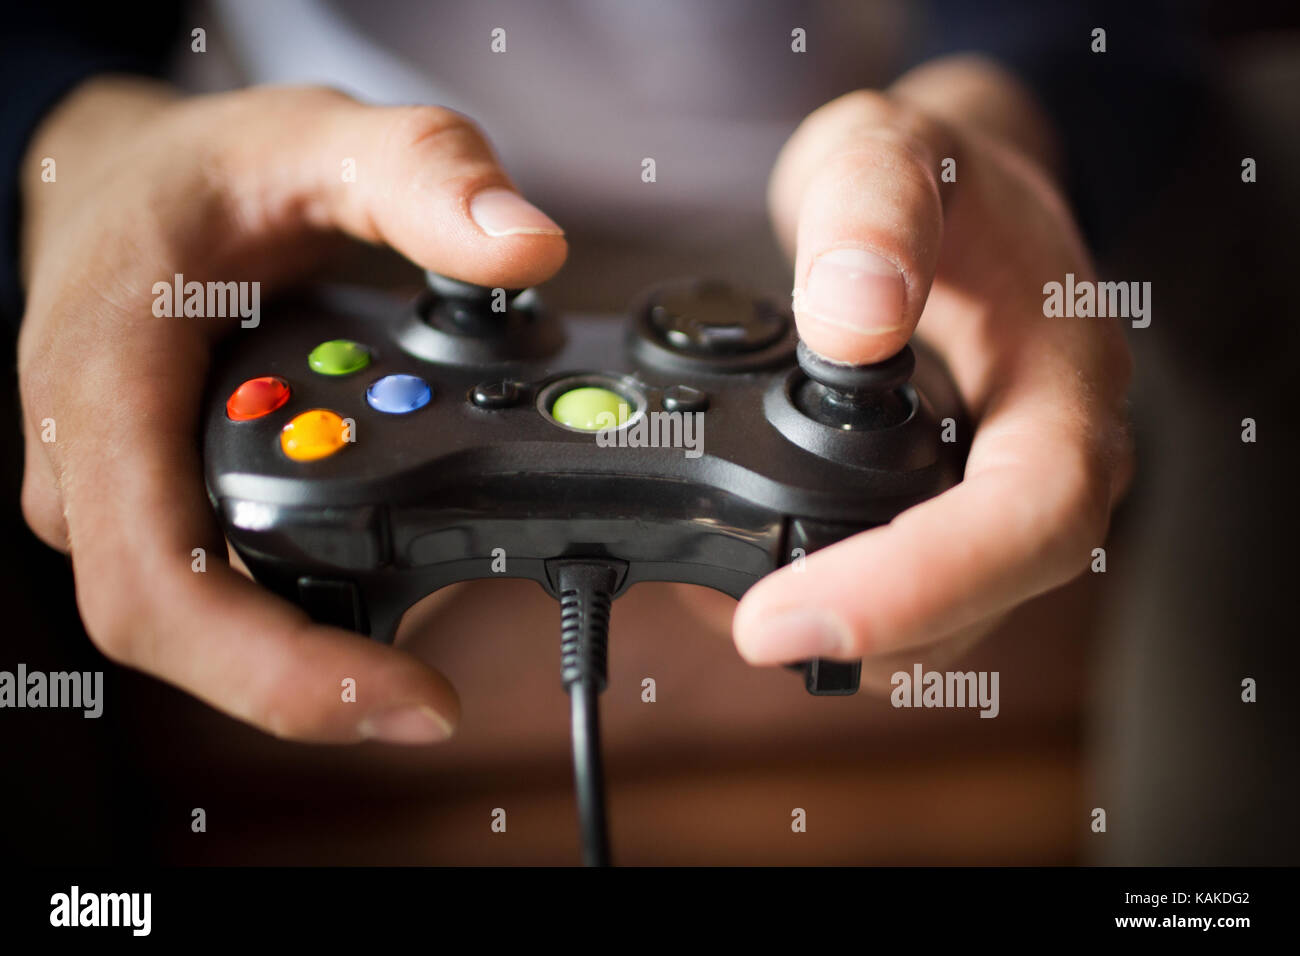 Close up view of joystick in mans hands. Stock Photo